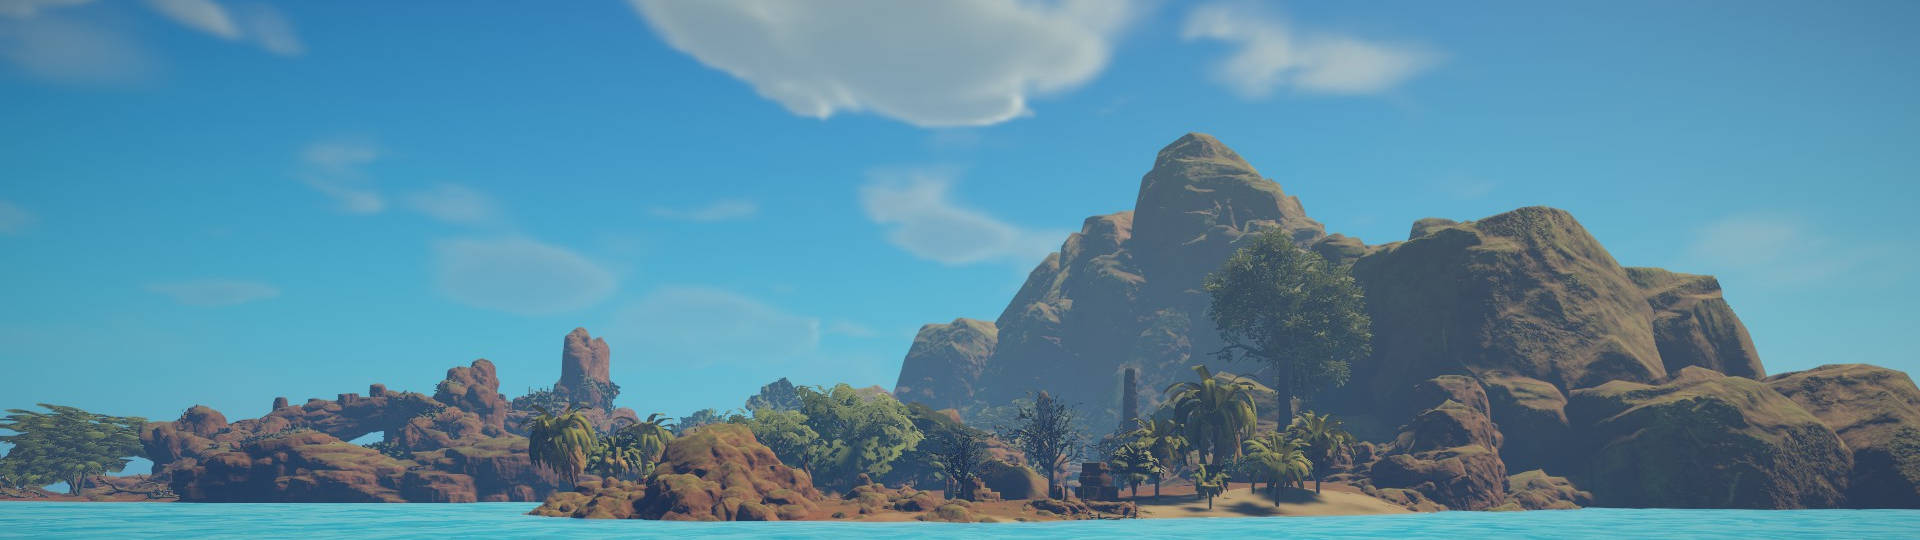 Survival: Fountain of Youth Survival Abilities and Skills Guide - Skills List Red Island in the Distance